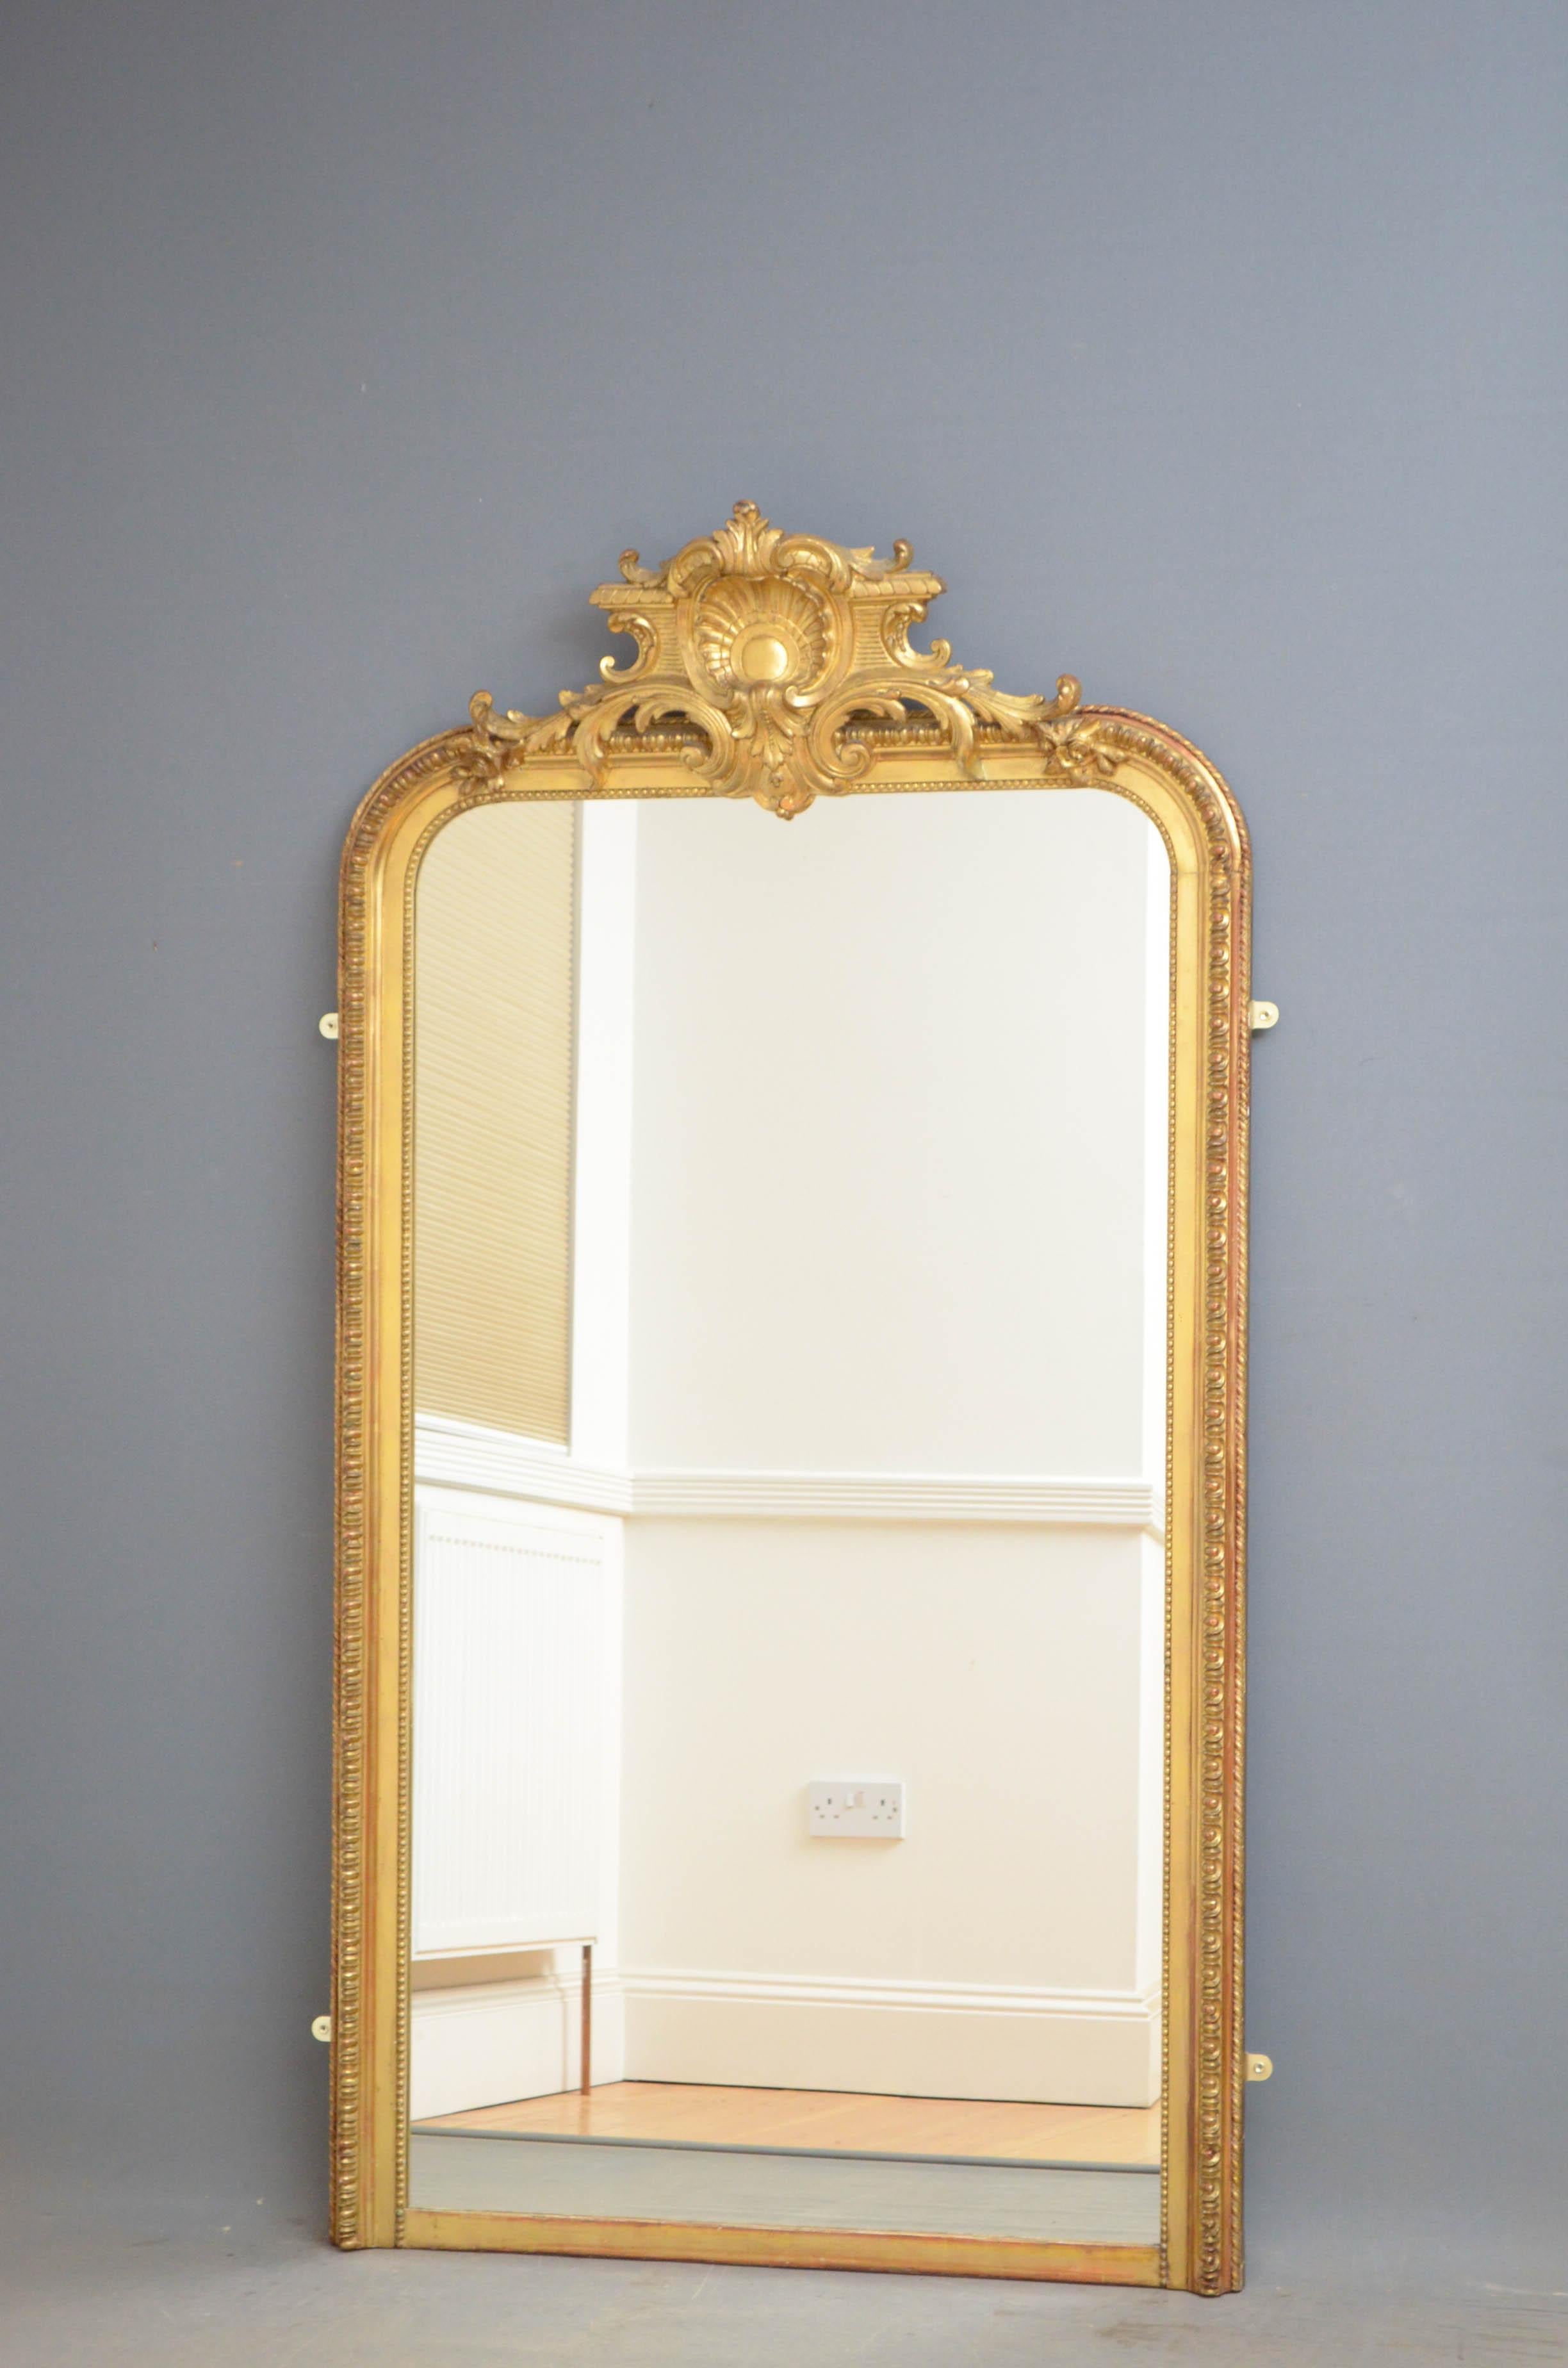 Sn4772 slim and tall 19th century gilt mirror with a replacement glass in beautifully decorated frame with centre crest to the top, all in fantastic home ready condition, circa 1870
Measures: H69